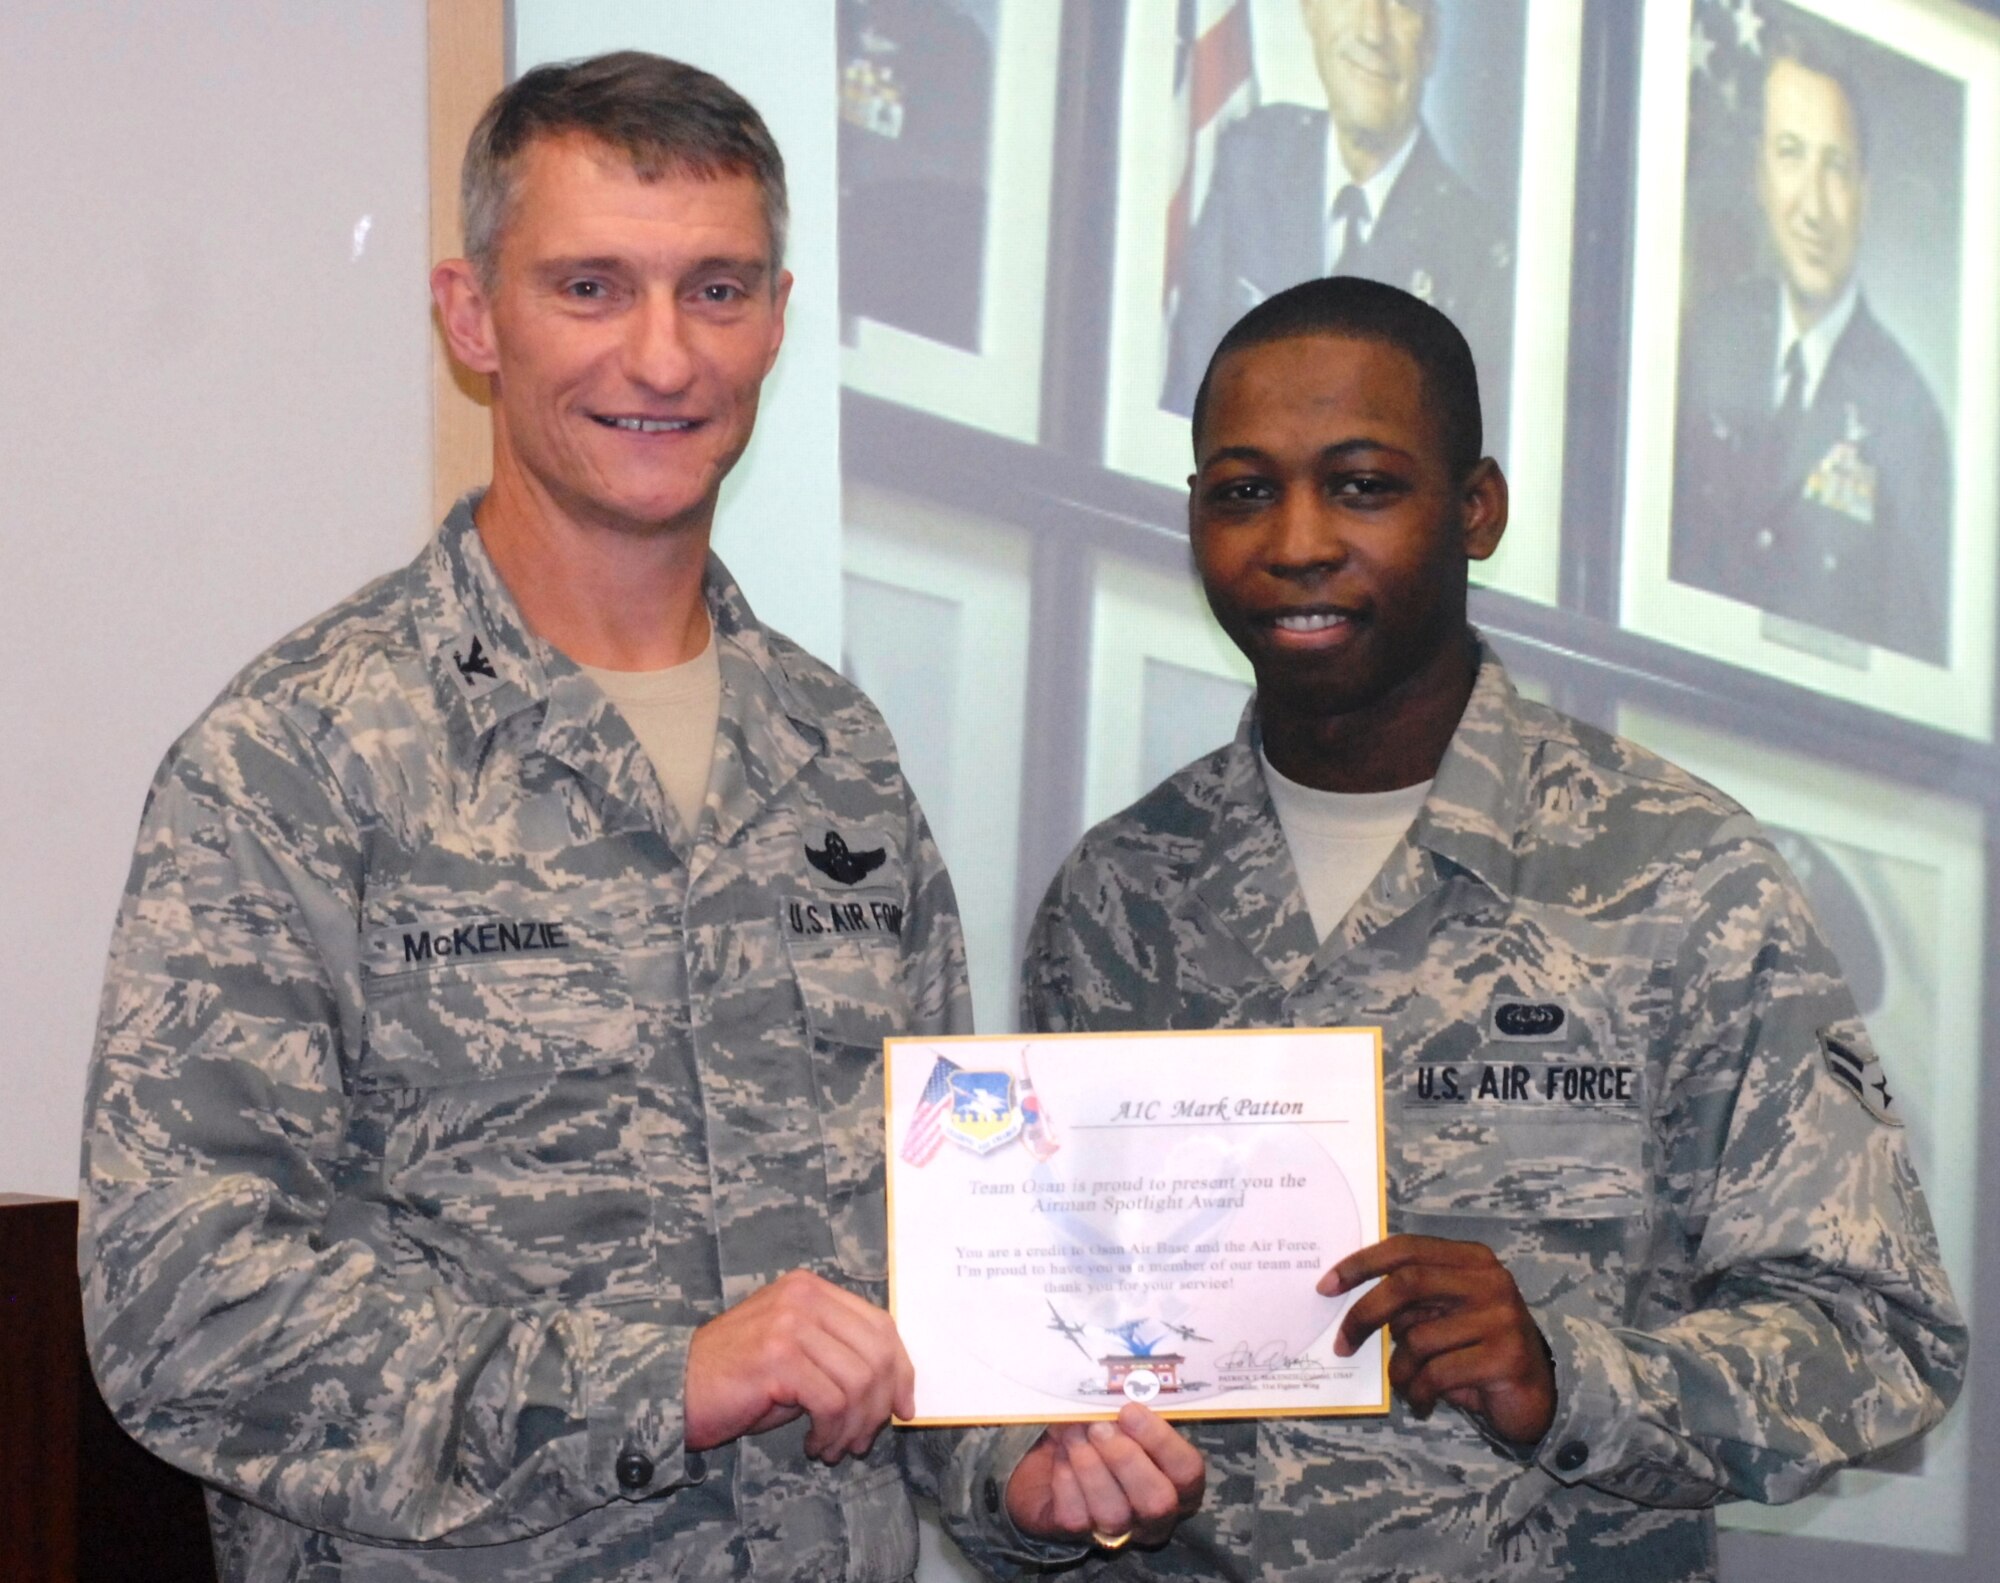 Col. Patrick McKenzie, 51st Fighter Wing commander, awards Airman 1st Class Mark Patton, 51st Fighter Wing staff, with a certificate recognizing him as the Airman Spotlight of the week August 16, 2011. (U.S. Air Force photo/Senior Master Sgt. Stuart Camp)